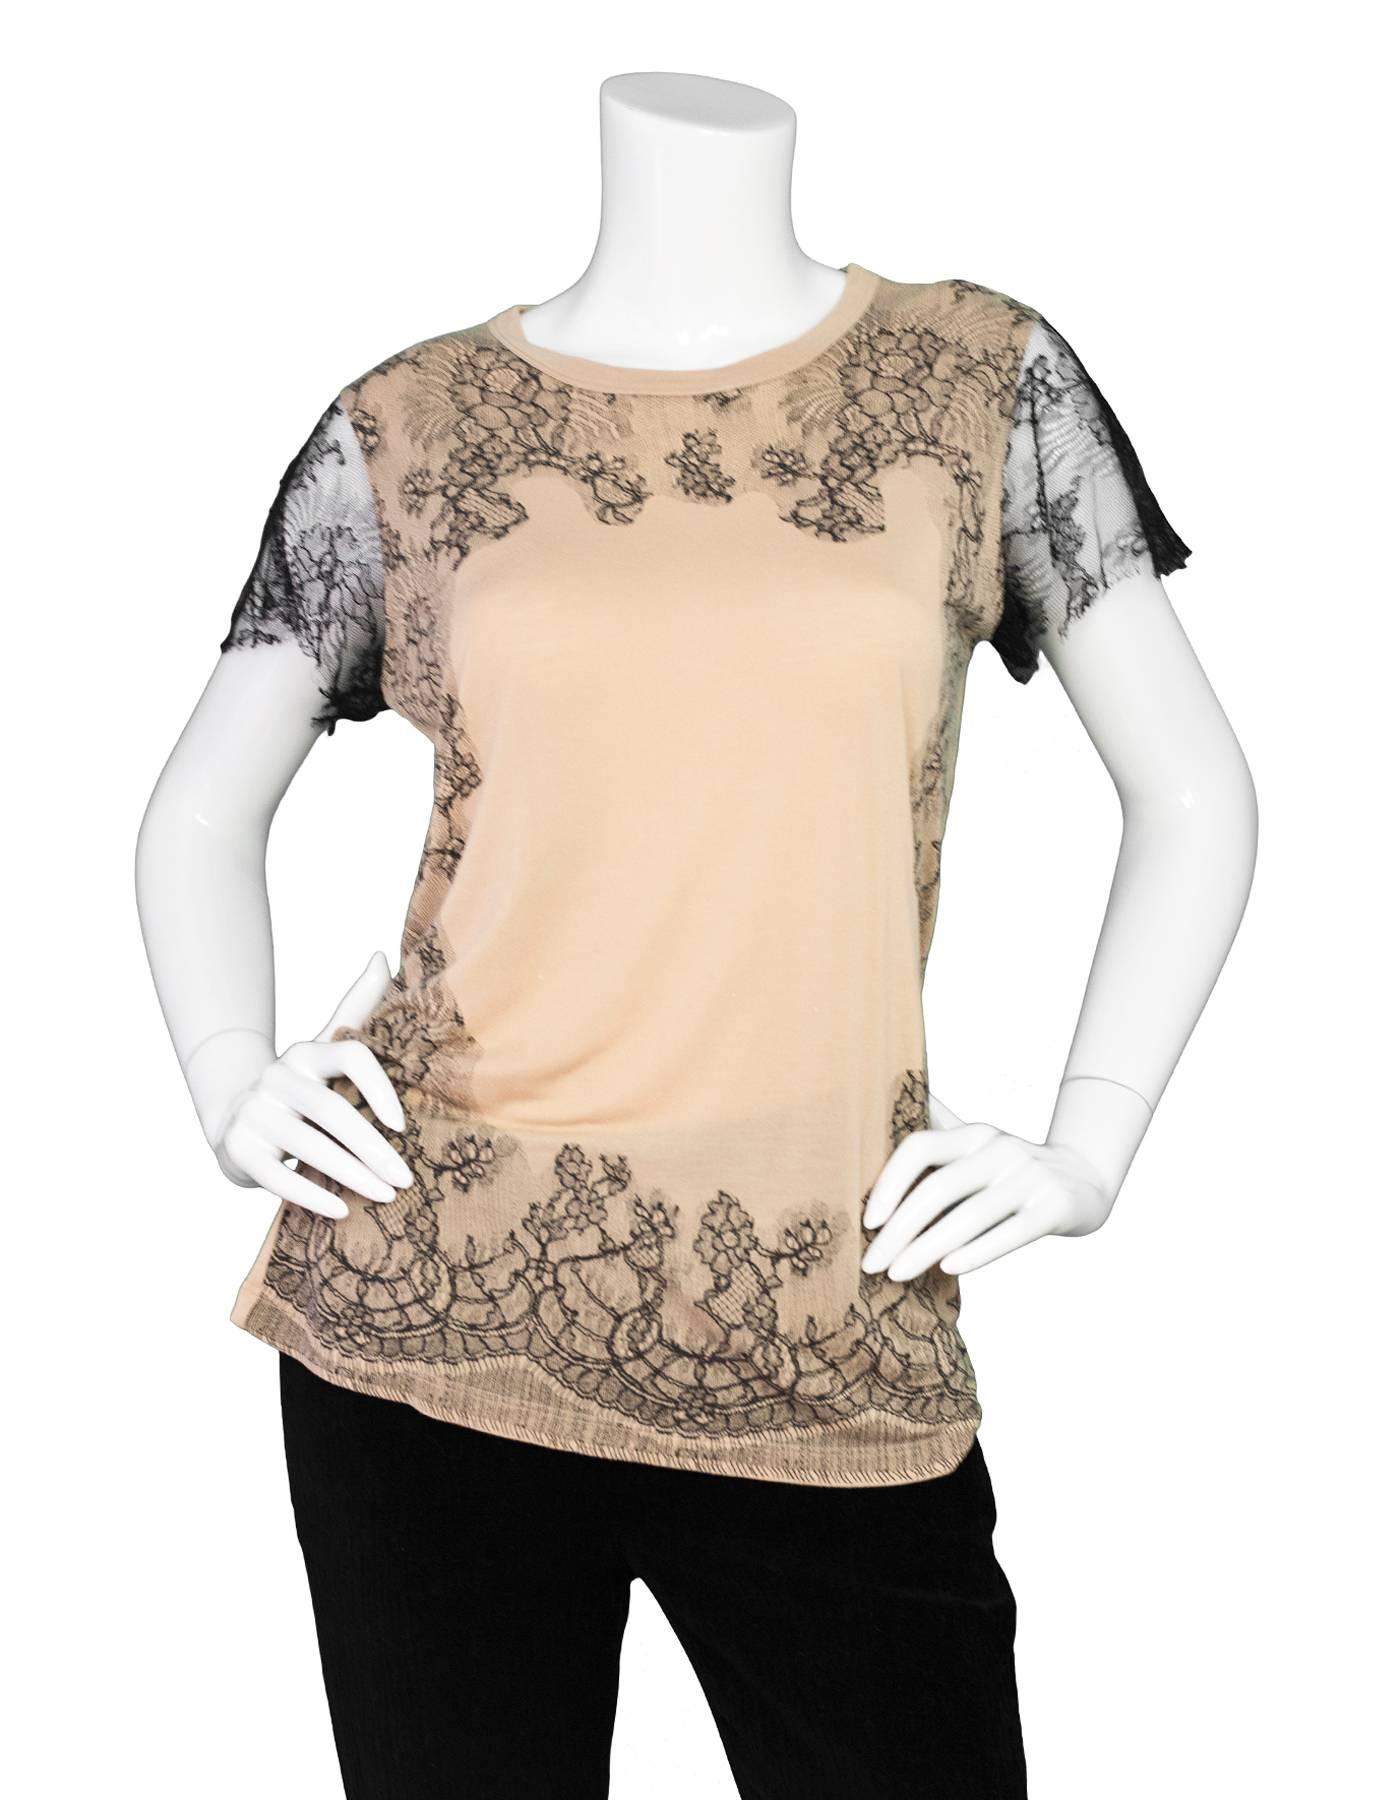 Valentino Black & Tan Lace Top Sz S

Color: Black, tan
Composition: Not listed, feels like cotton blend
Closure/Opening: Pull over
Overall Condition: Excellent pre-owned condition
Marked Size: S
Bust: 32"
Waist: 31"
Total Length: